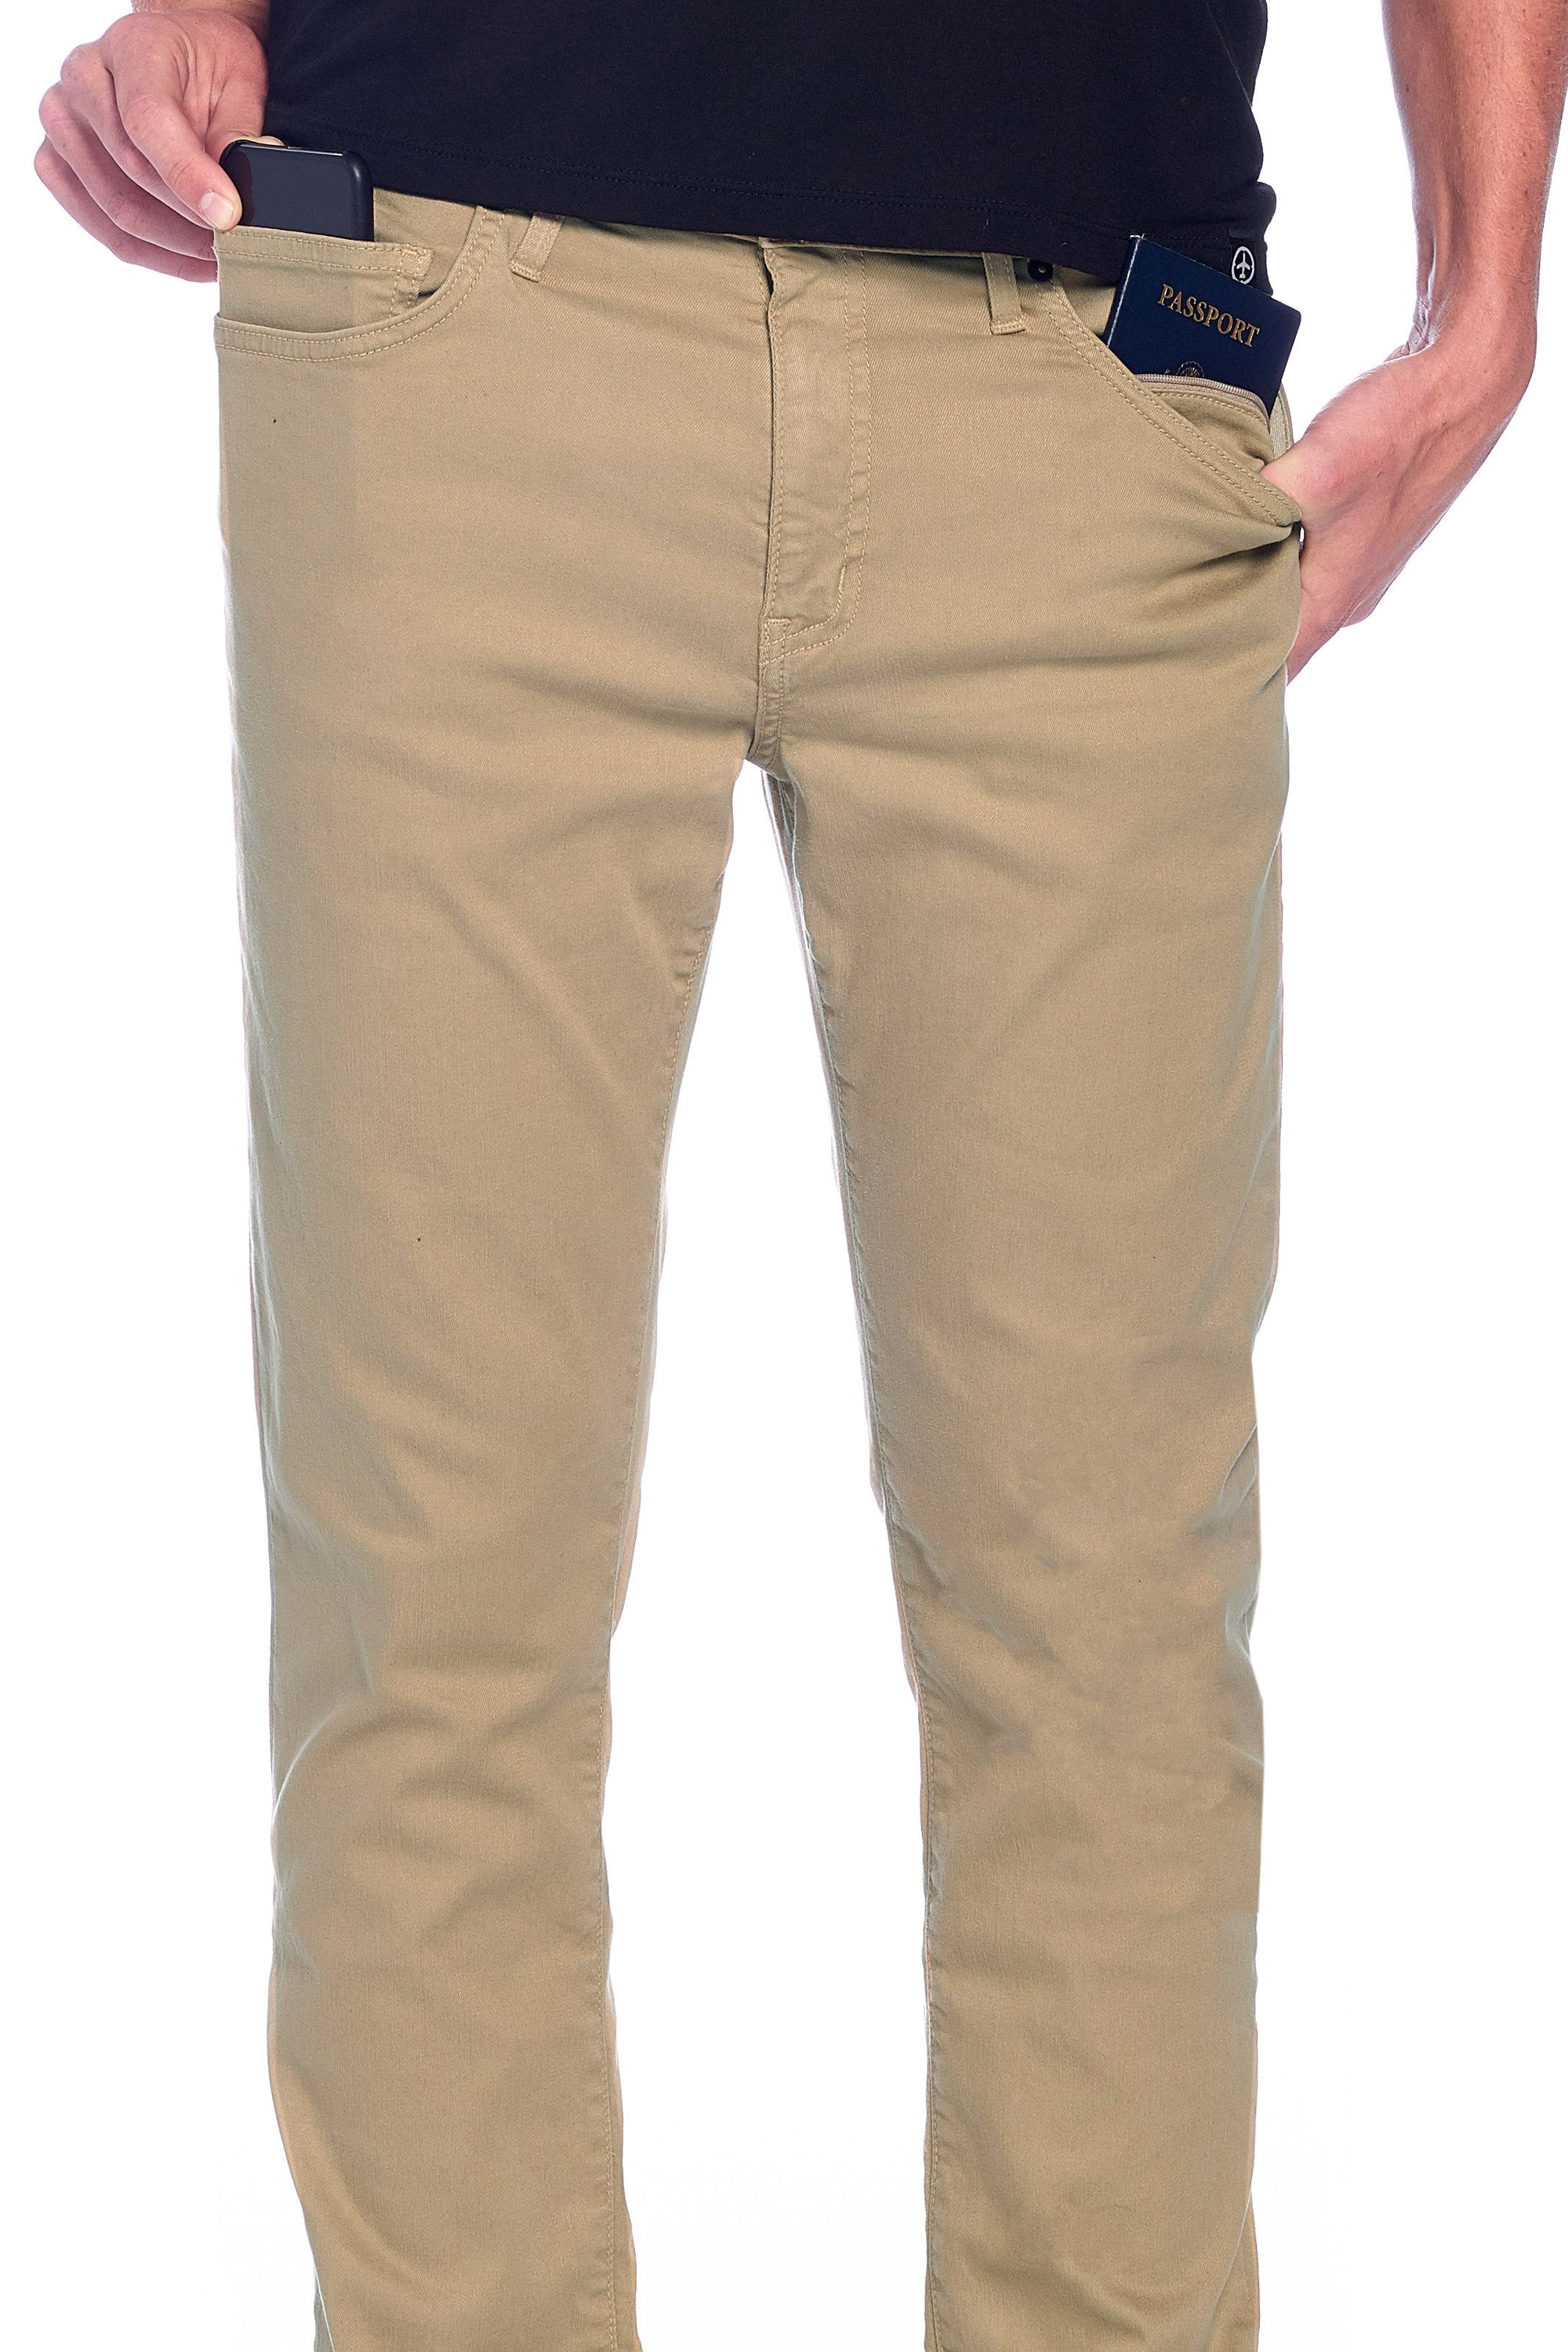 Aviator men's travel jeans in a khaki color made of a soft brushed Japanese twill